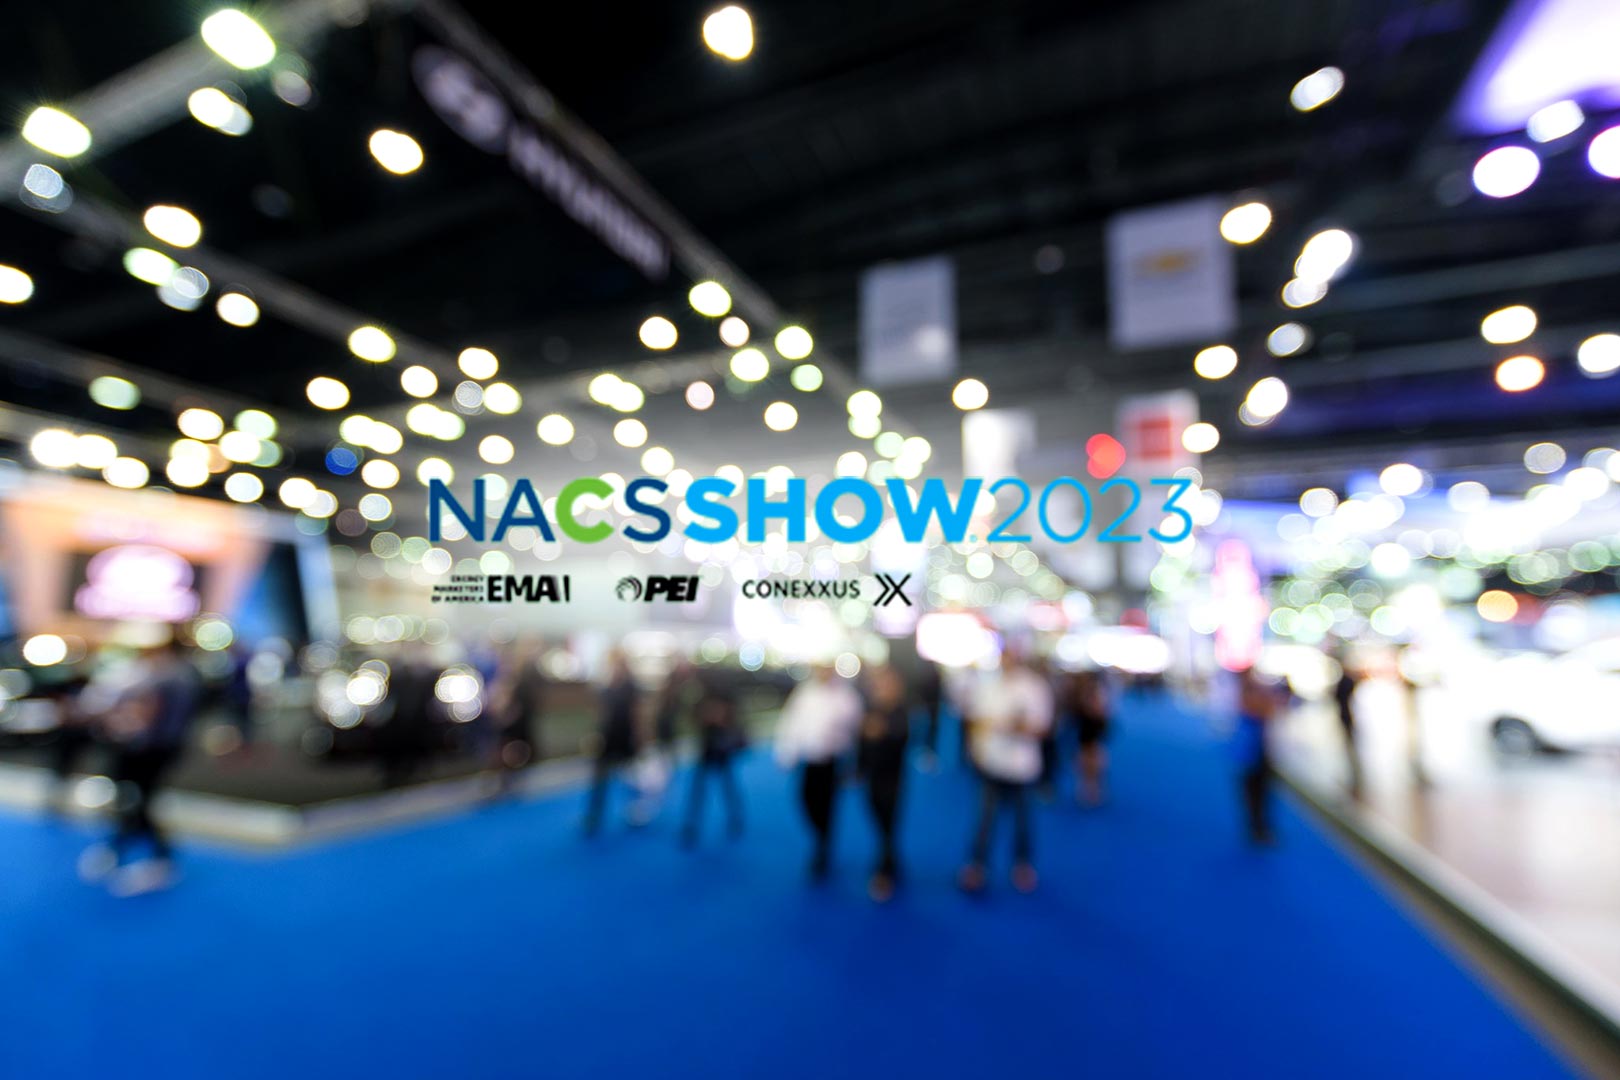 Stack3d Attending The Nacs Show 2023